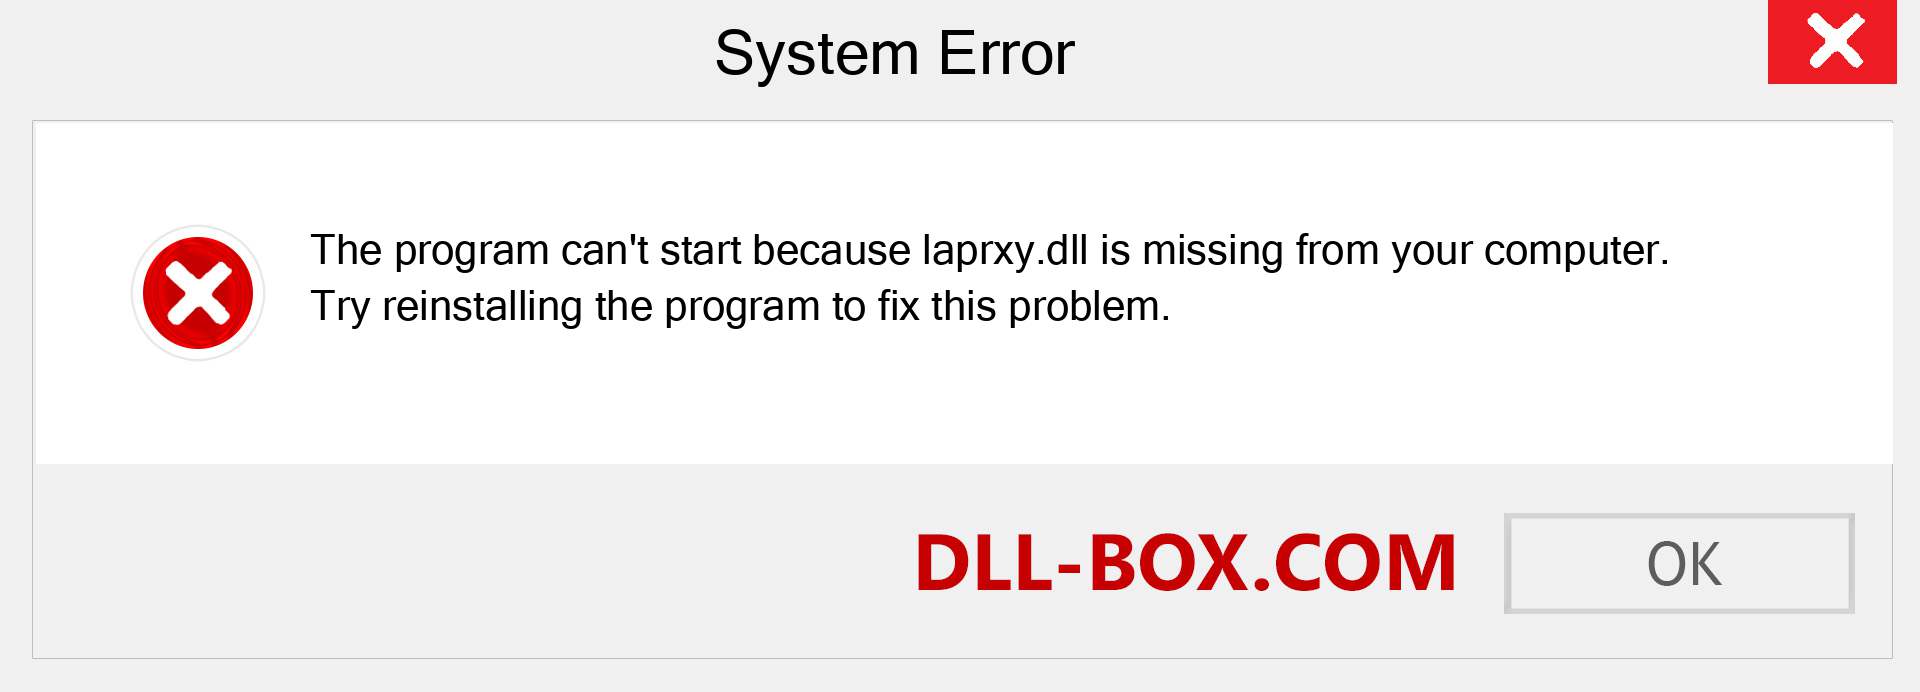  laprxy.dll file is missing?. Download for Windows 7, 8, 10 - Fix  laprxy dll Missing Error on Windows, photos, images